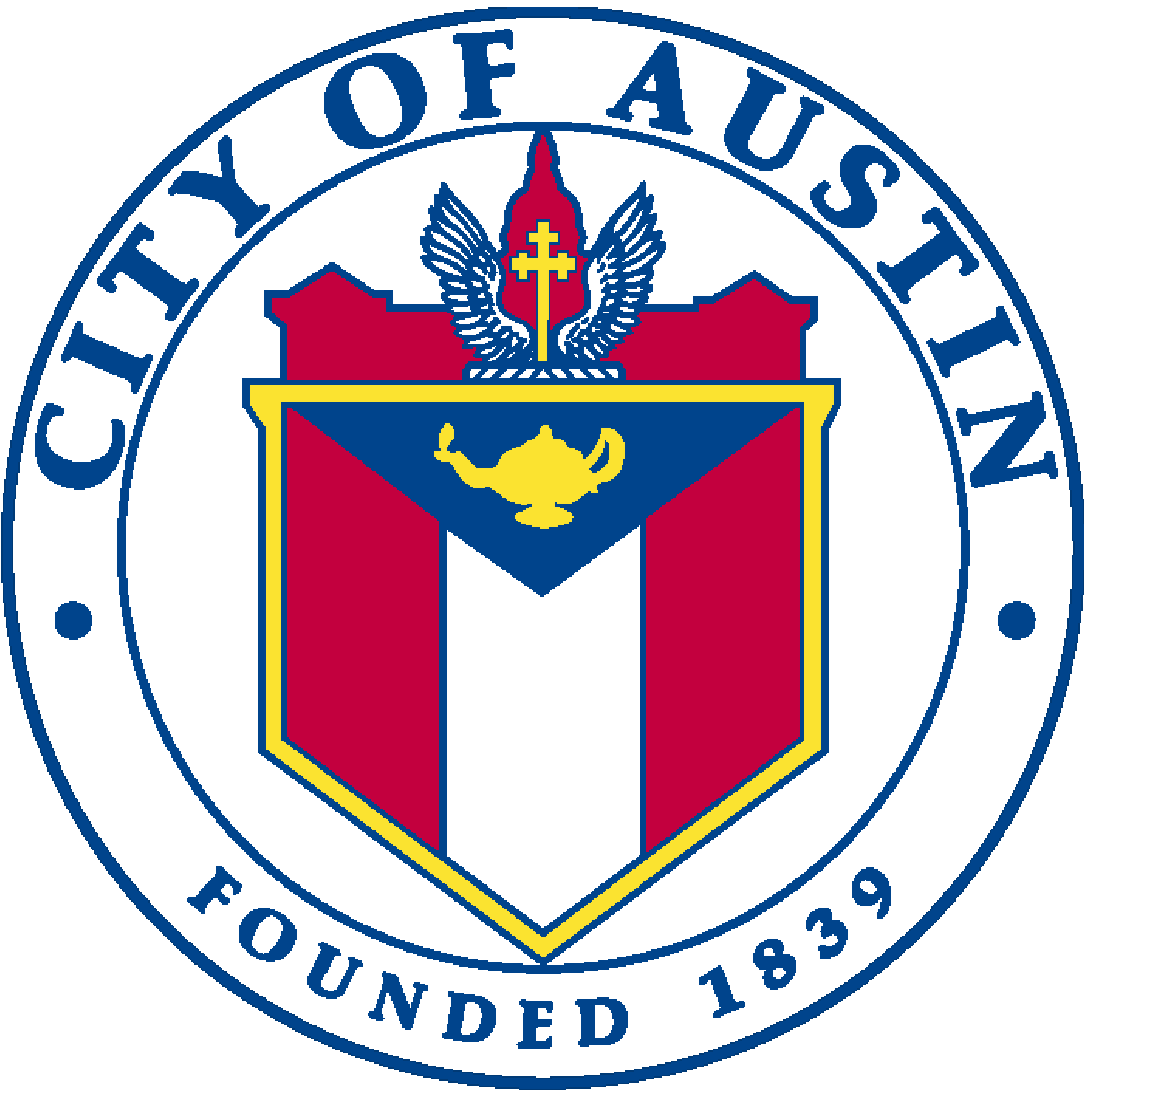 The City of Austin Law Department is currently looking for an Assistant City Attorney I, II, III, IV, or V for the Land Use and Real Estate Division. 

For more information, please go to:
austincityjobs.org/hr/postings/11…